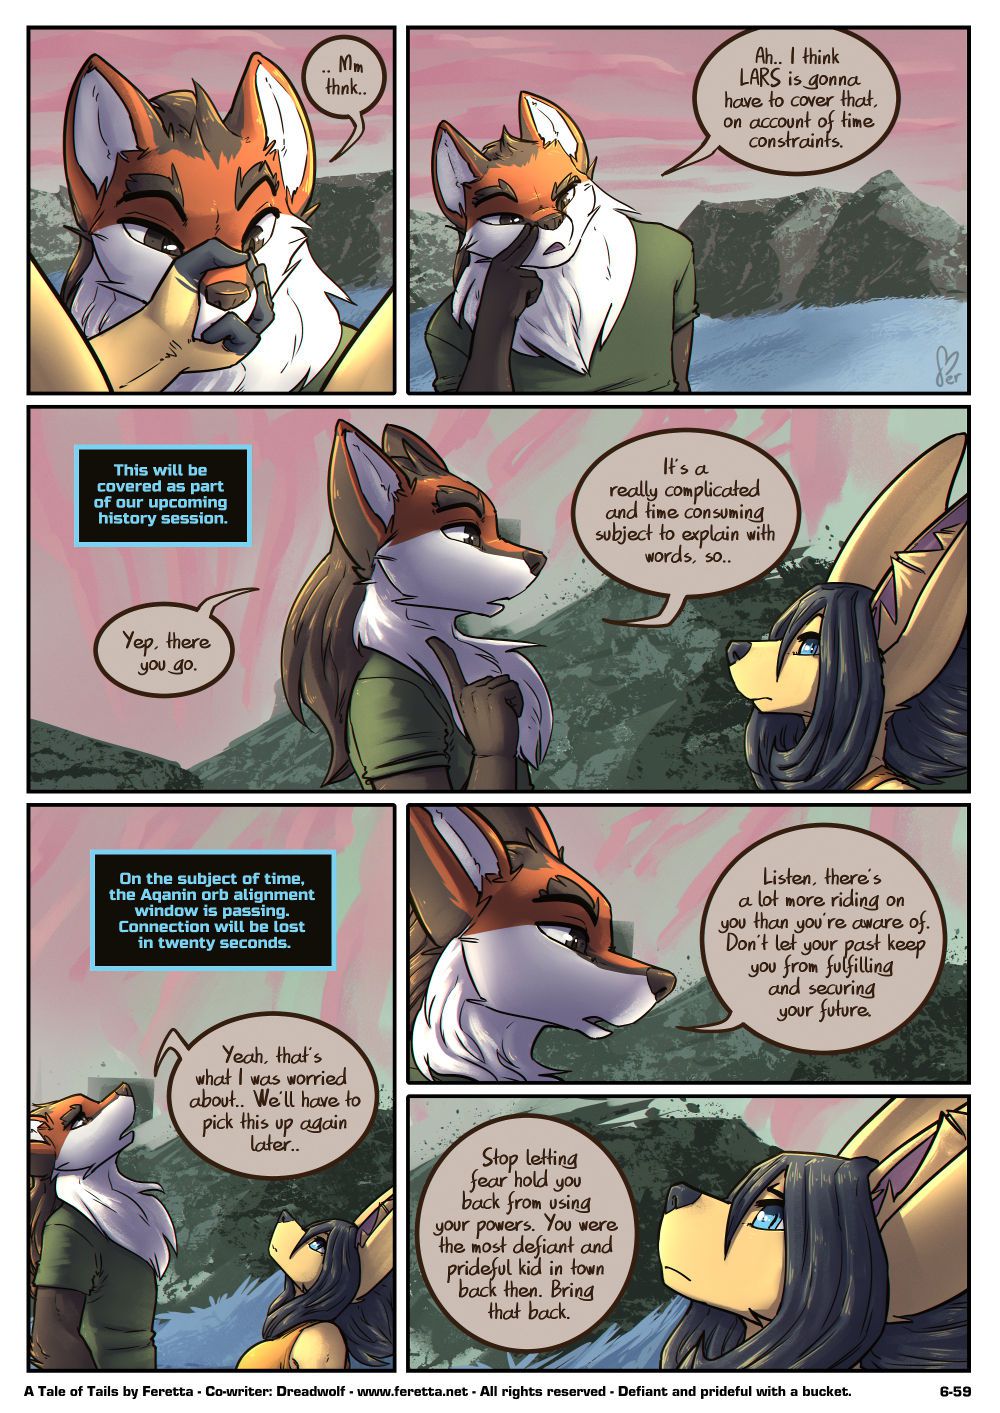 [Feretta] A Tale of Tails: Chapter 6 - Paths converge (ongoing) 61